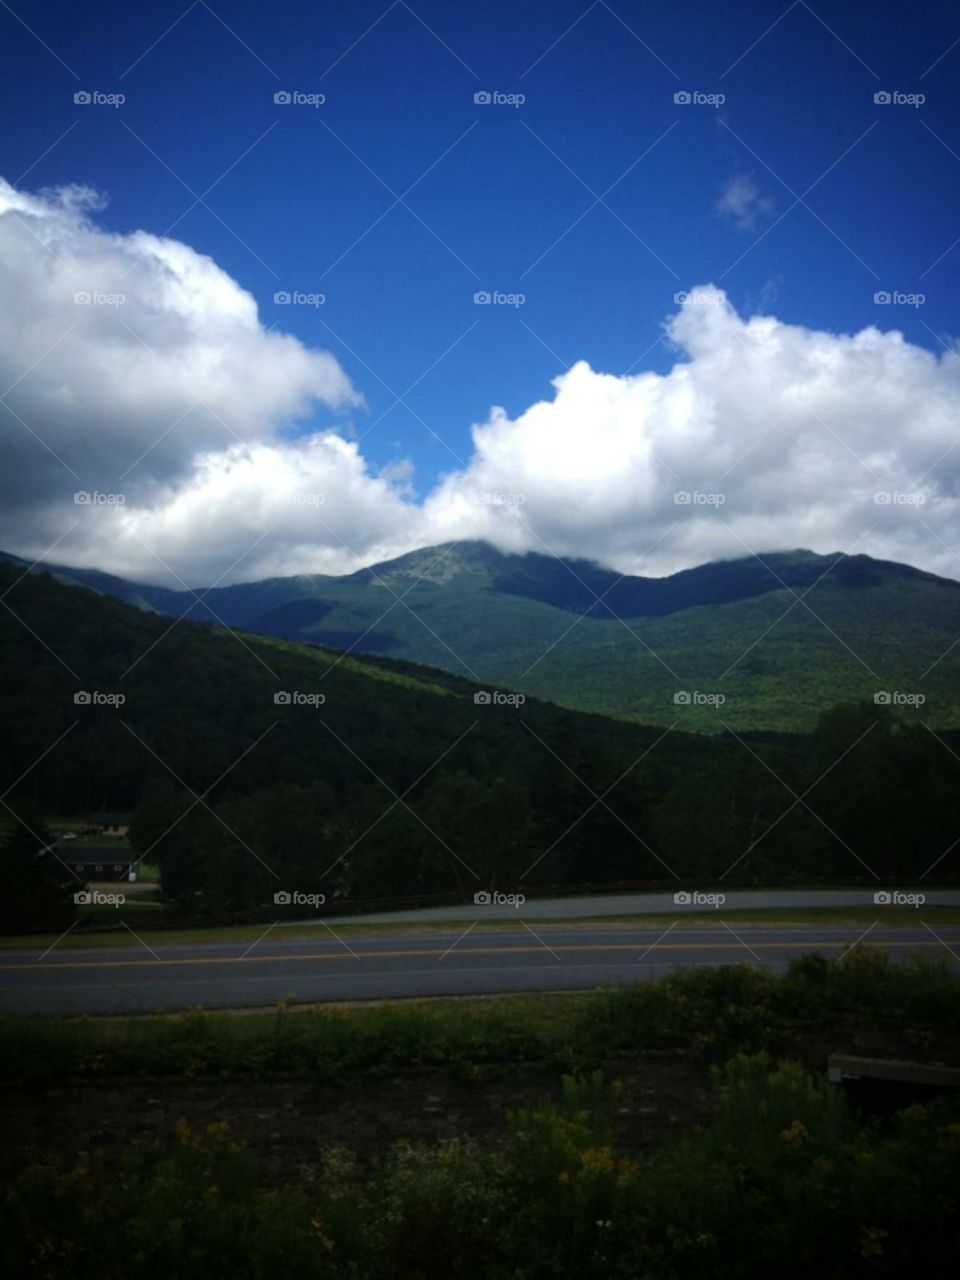 Looking up at Mount Washington . View from the road 